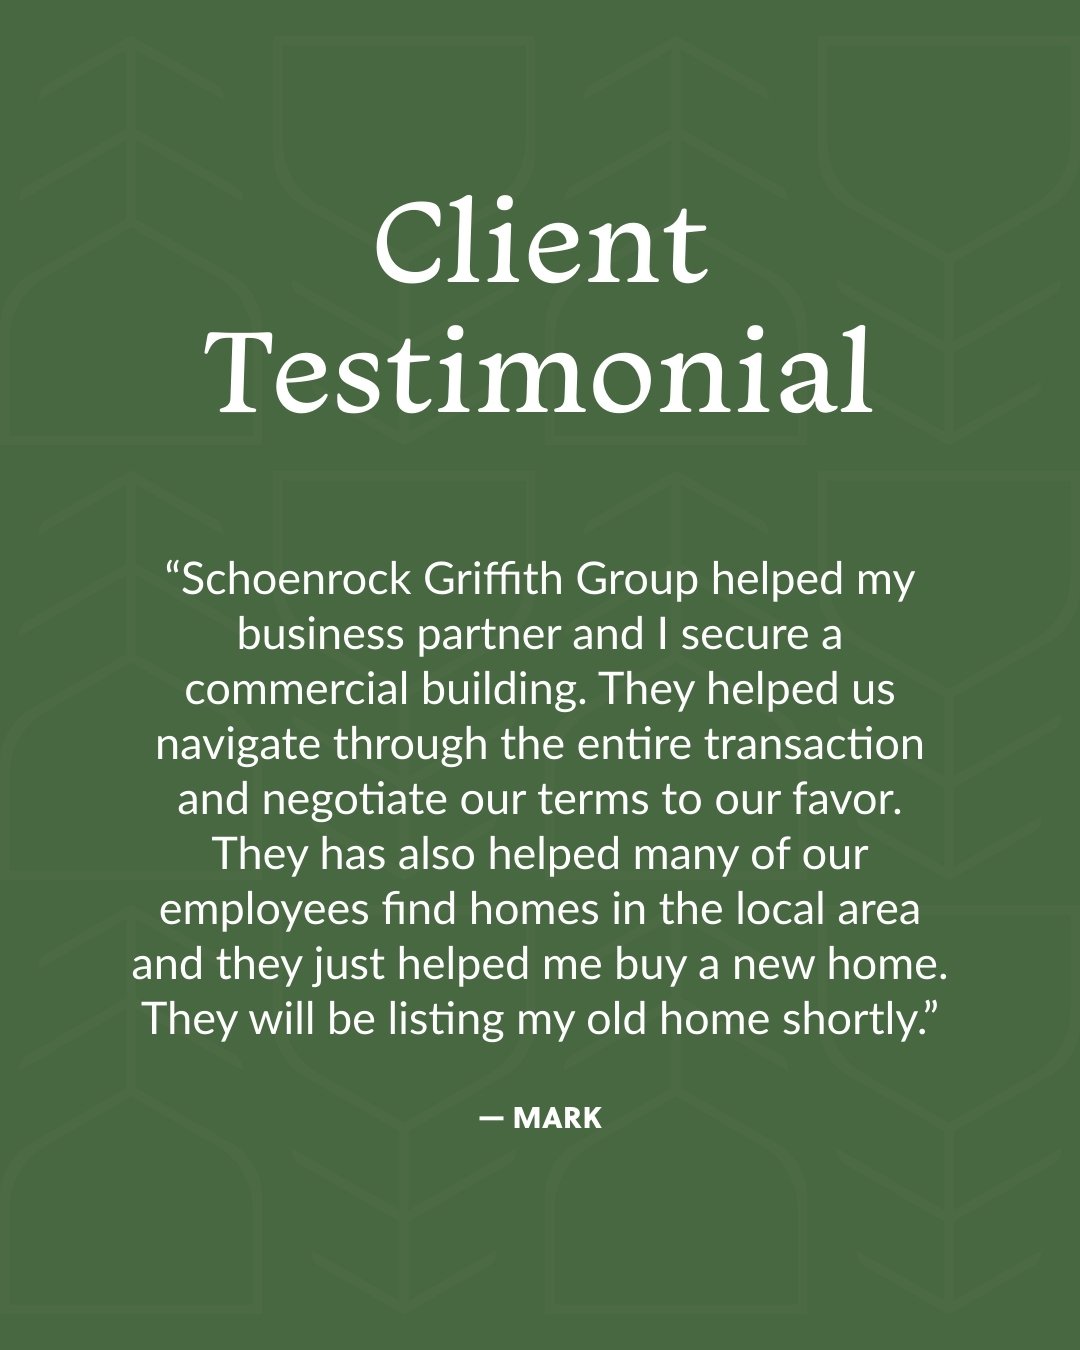 Client Shoutout: Mark's Experience!

Helping our clients achieve their goals is our top priority. We dedicate ourselves to exceeding your expectations every time and having fun along the way.

Coming alongside Mark, Lauren, and their family to help t